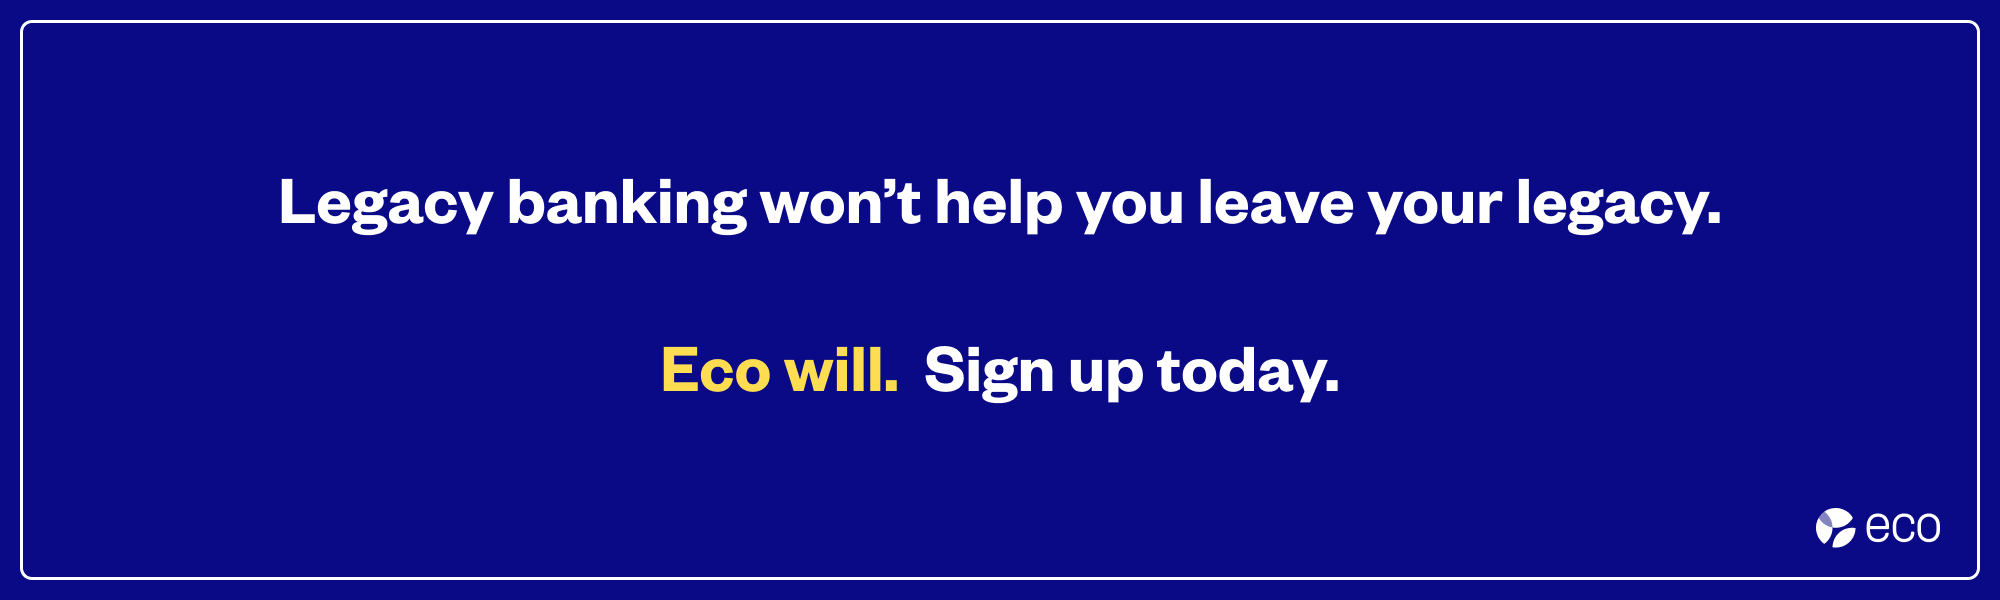 Sign up for Eco today